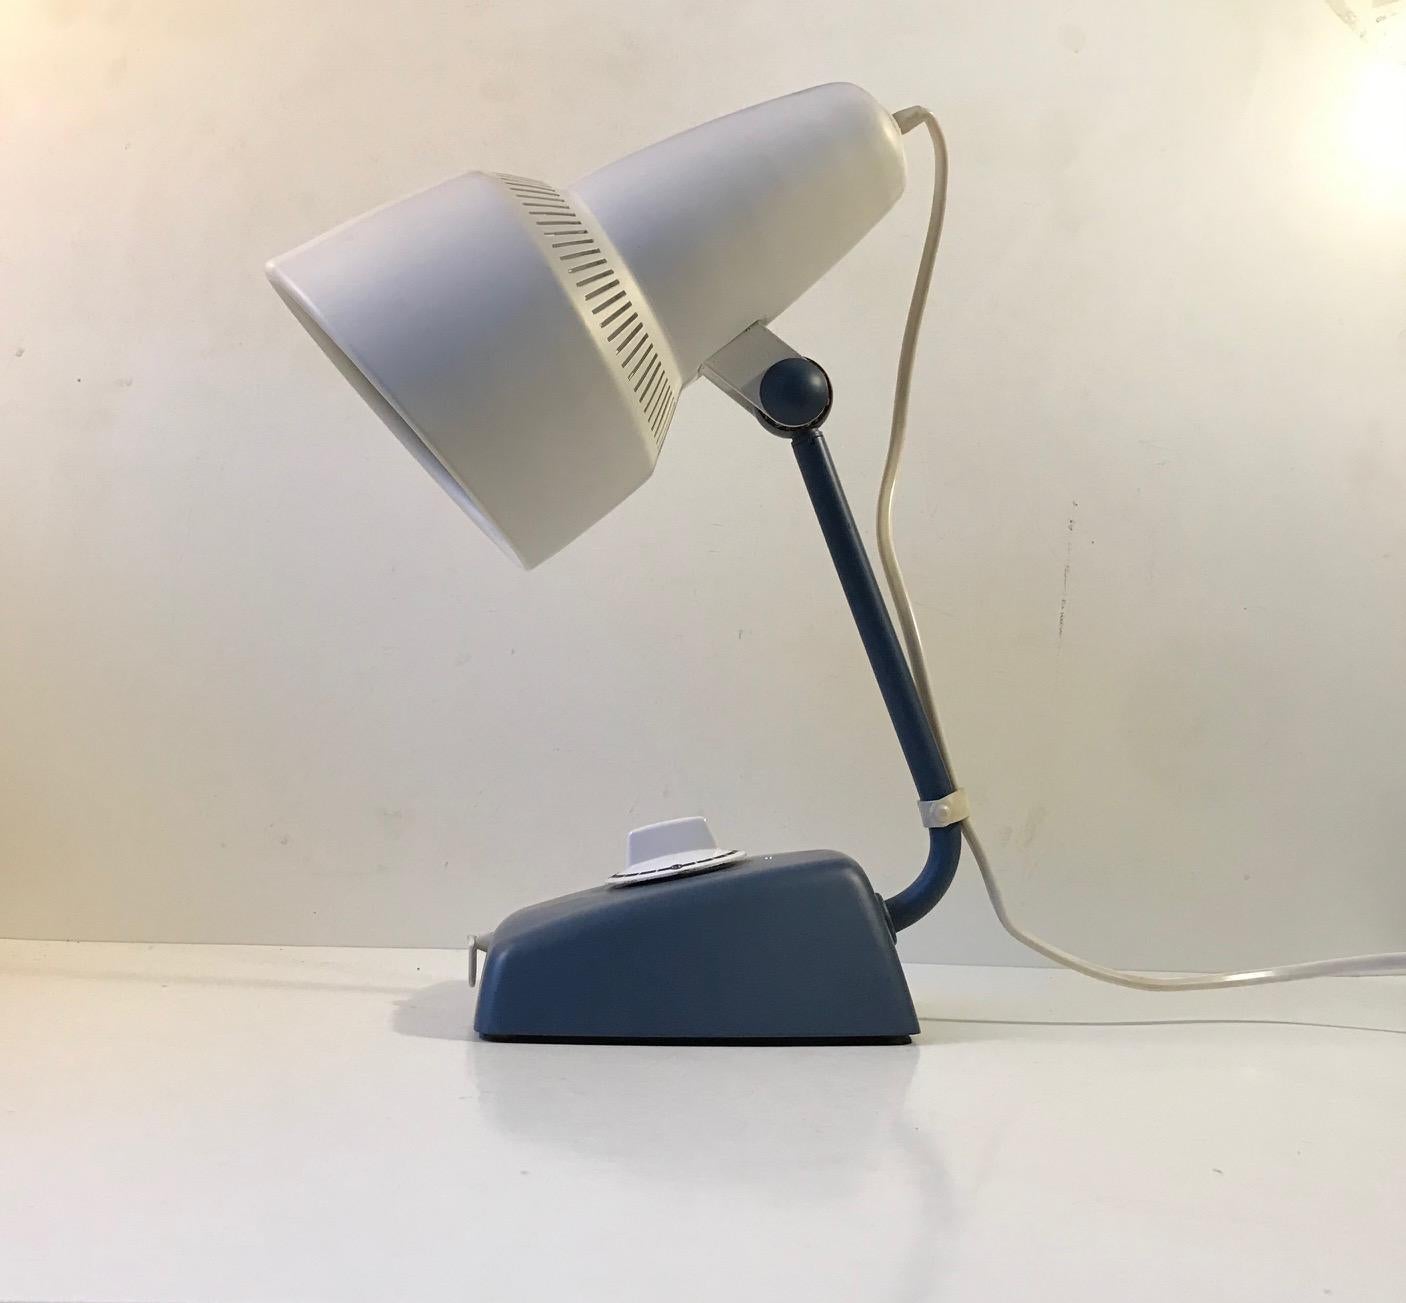 Stylish midcentury table lamp from Dutch Philips. Originally it was designed as a health - infrared heater. It still has all the features: timer, emergency switch etc but it has been converted to a regular table lamp with a 75 watt lightbulb. There